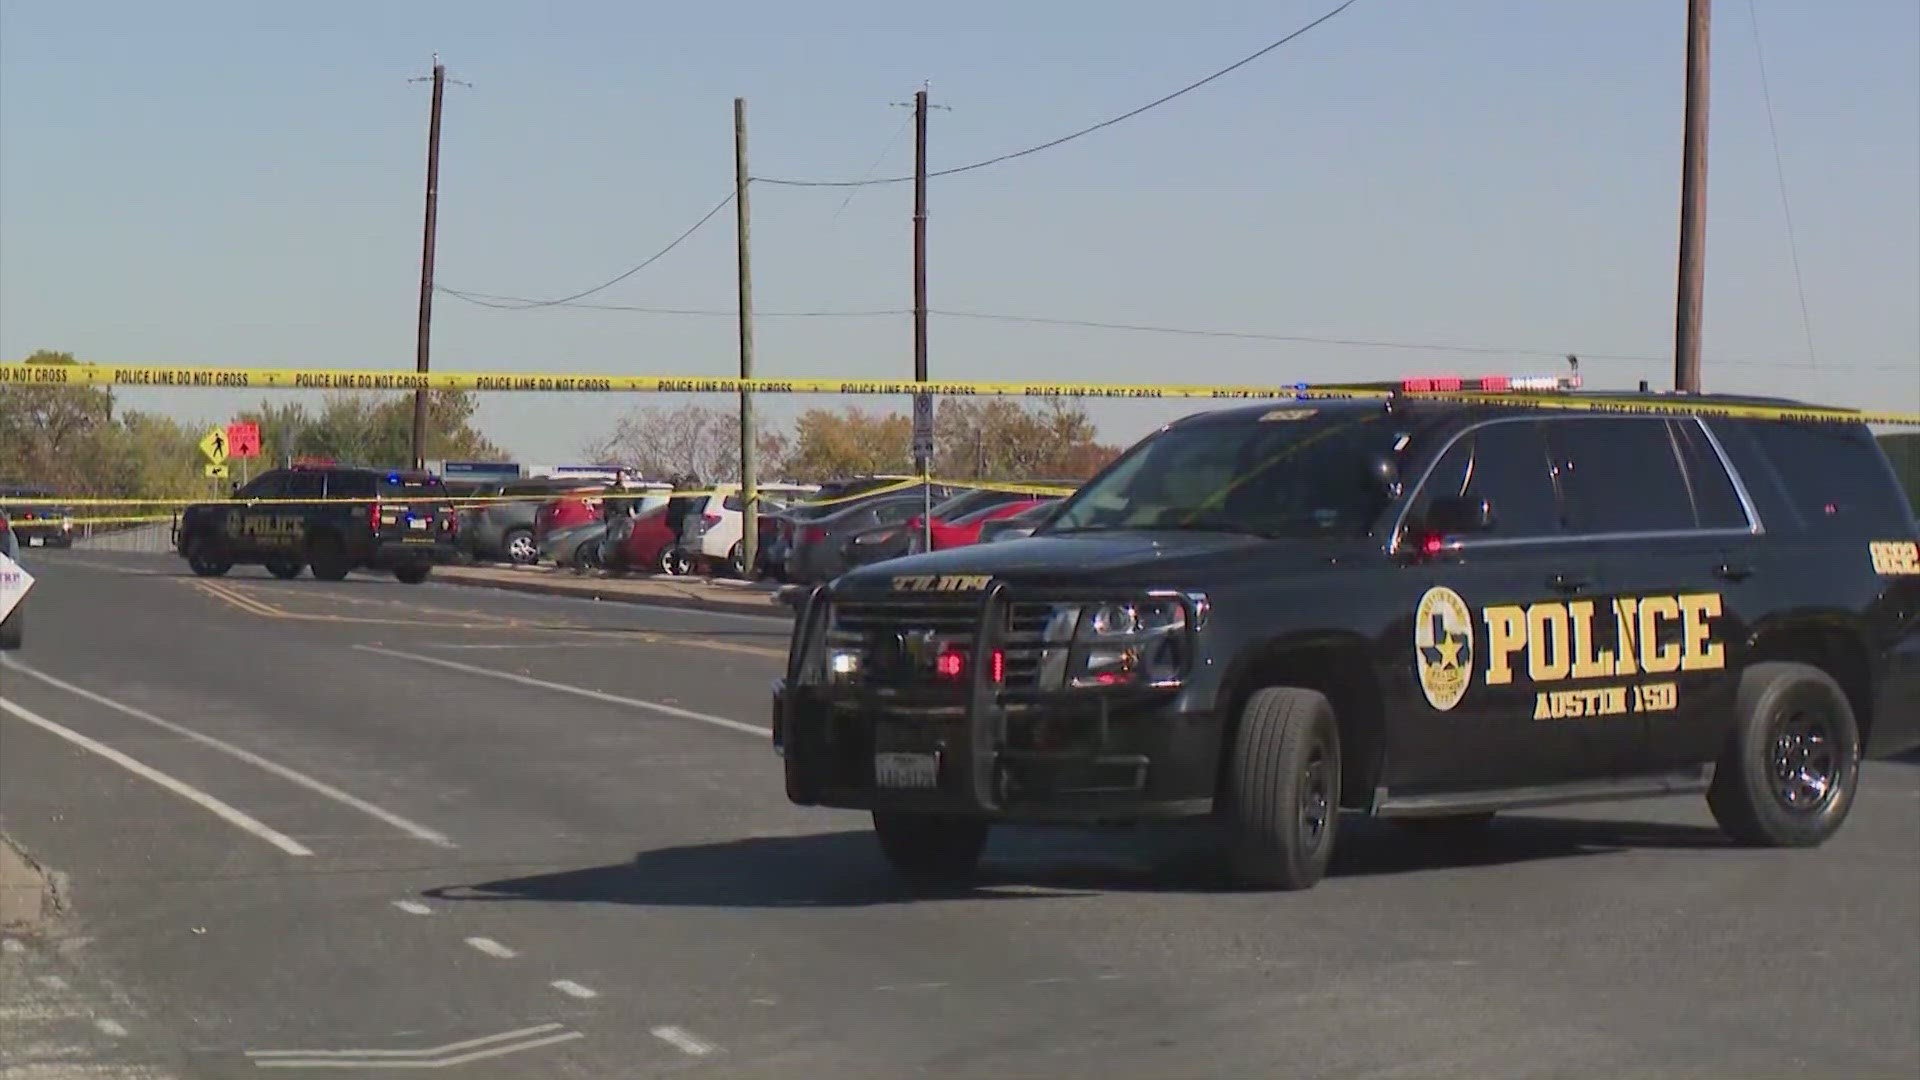 The officer's injuries do not appear to be life-threatening after the shooting at Northeast Early College High School.